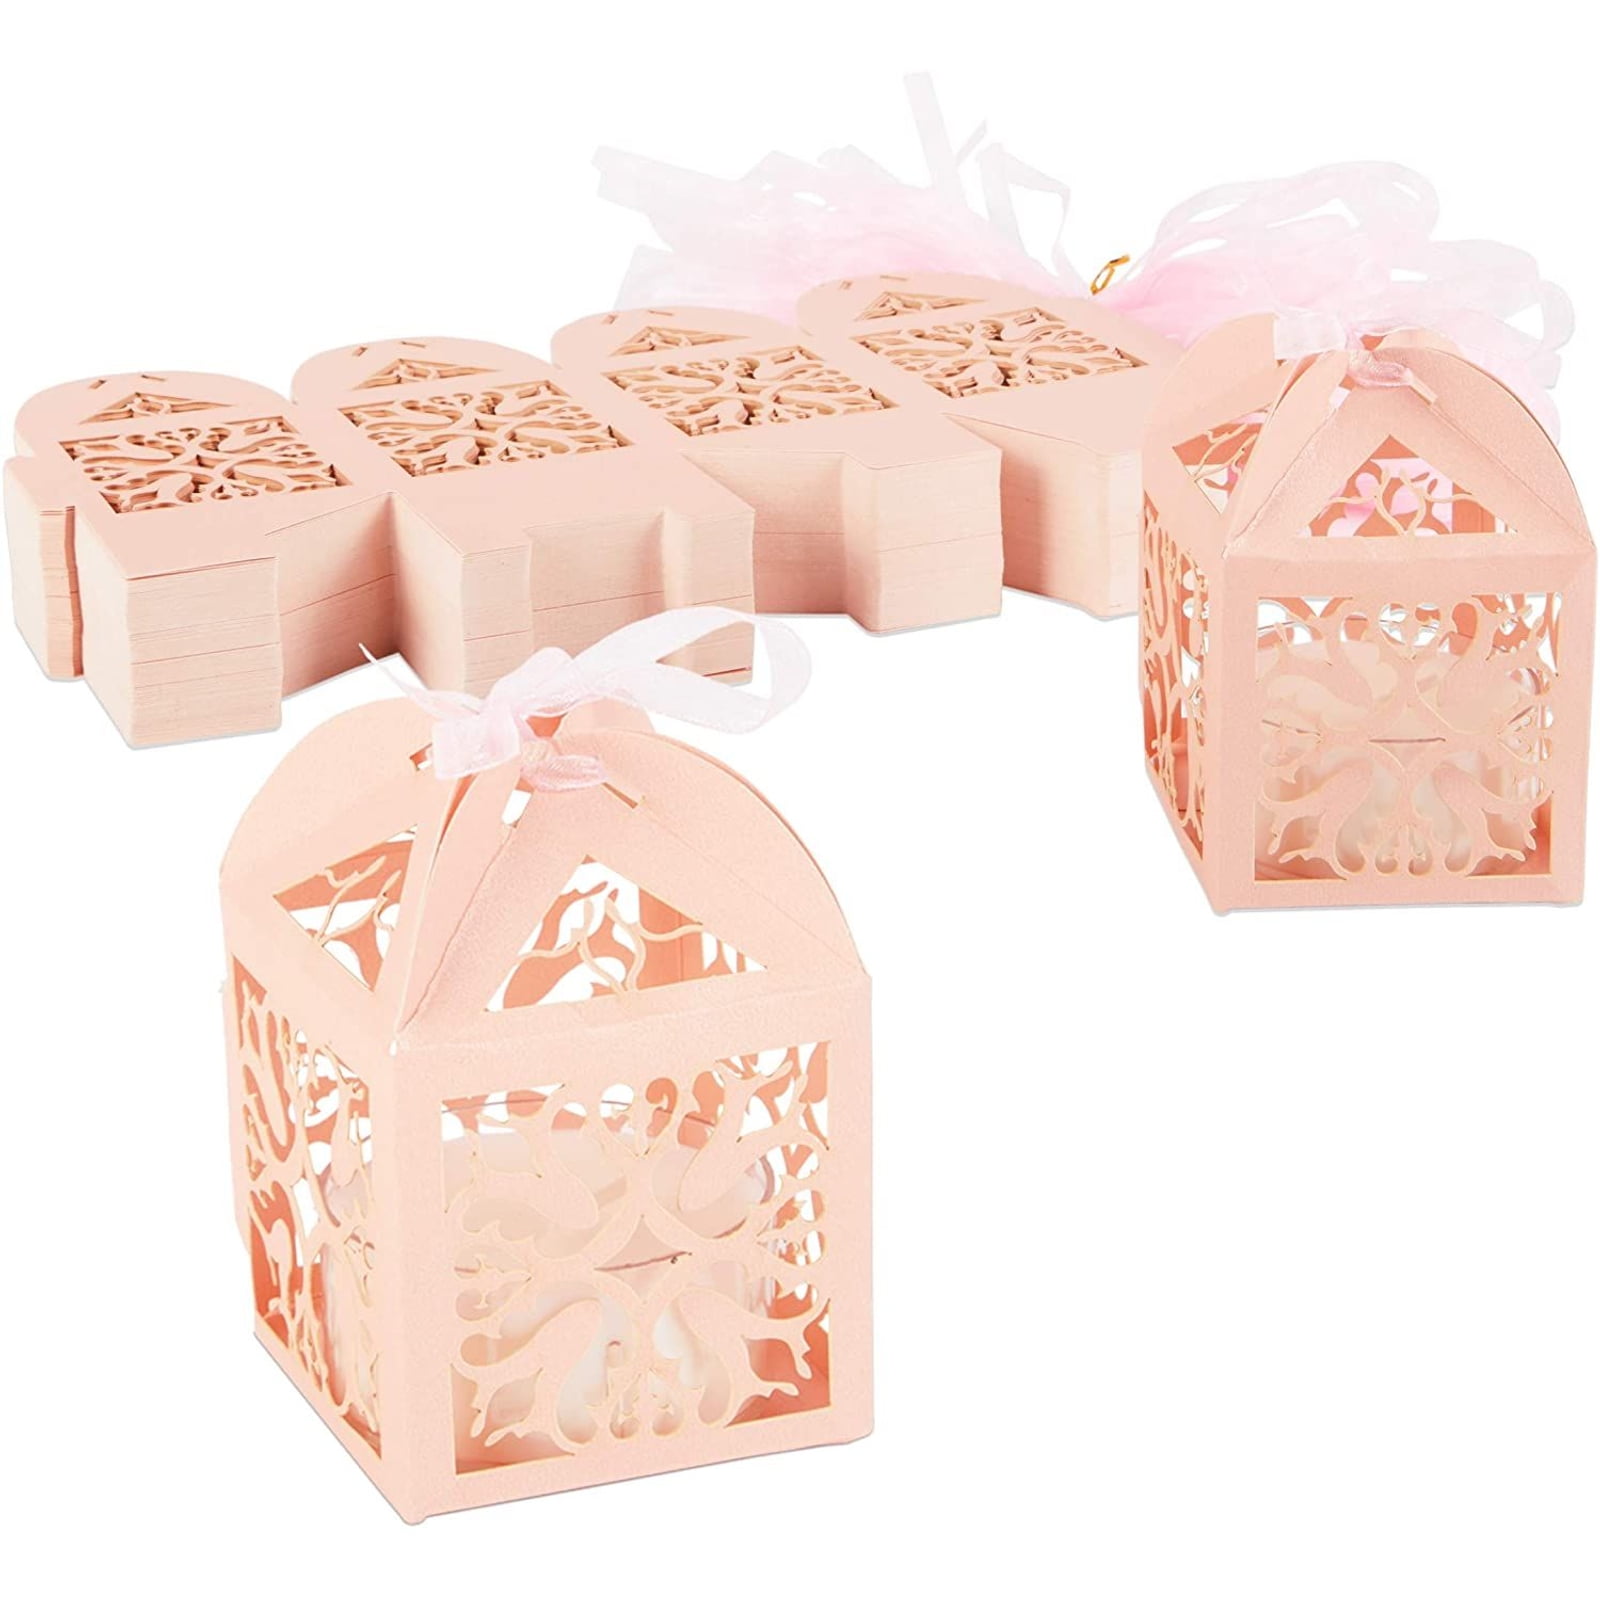 25 GOLD BOX HEART PEARL FAVOUR BOXES WEDDING OR PARTY! 